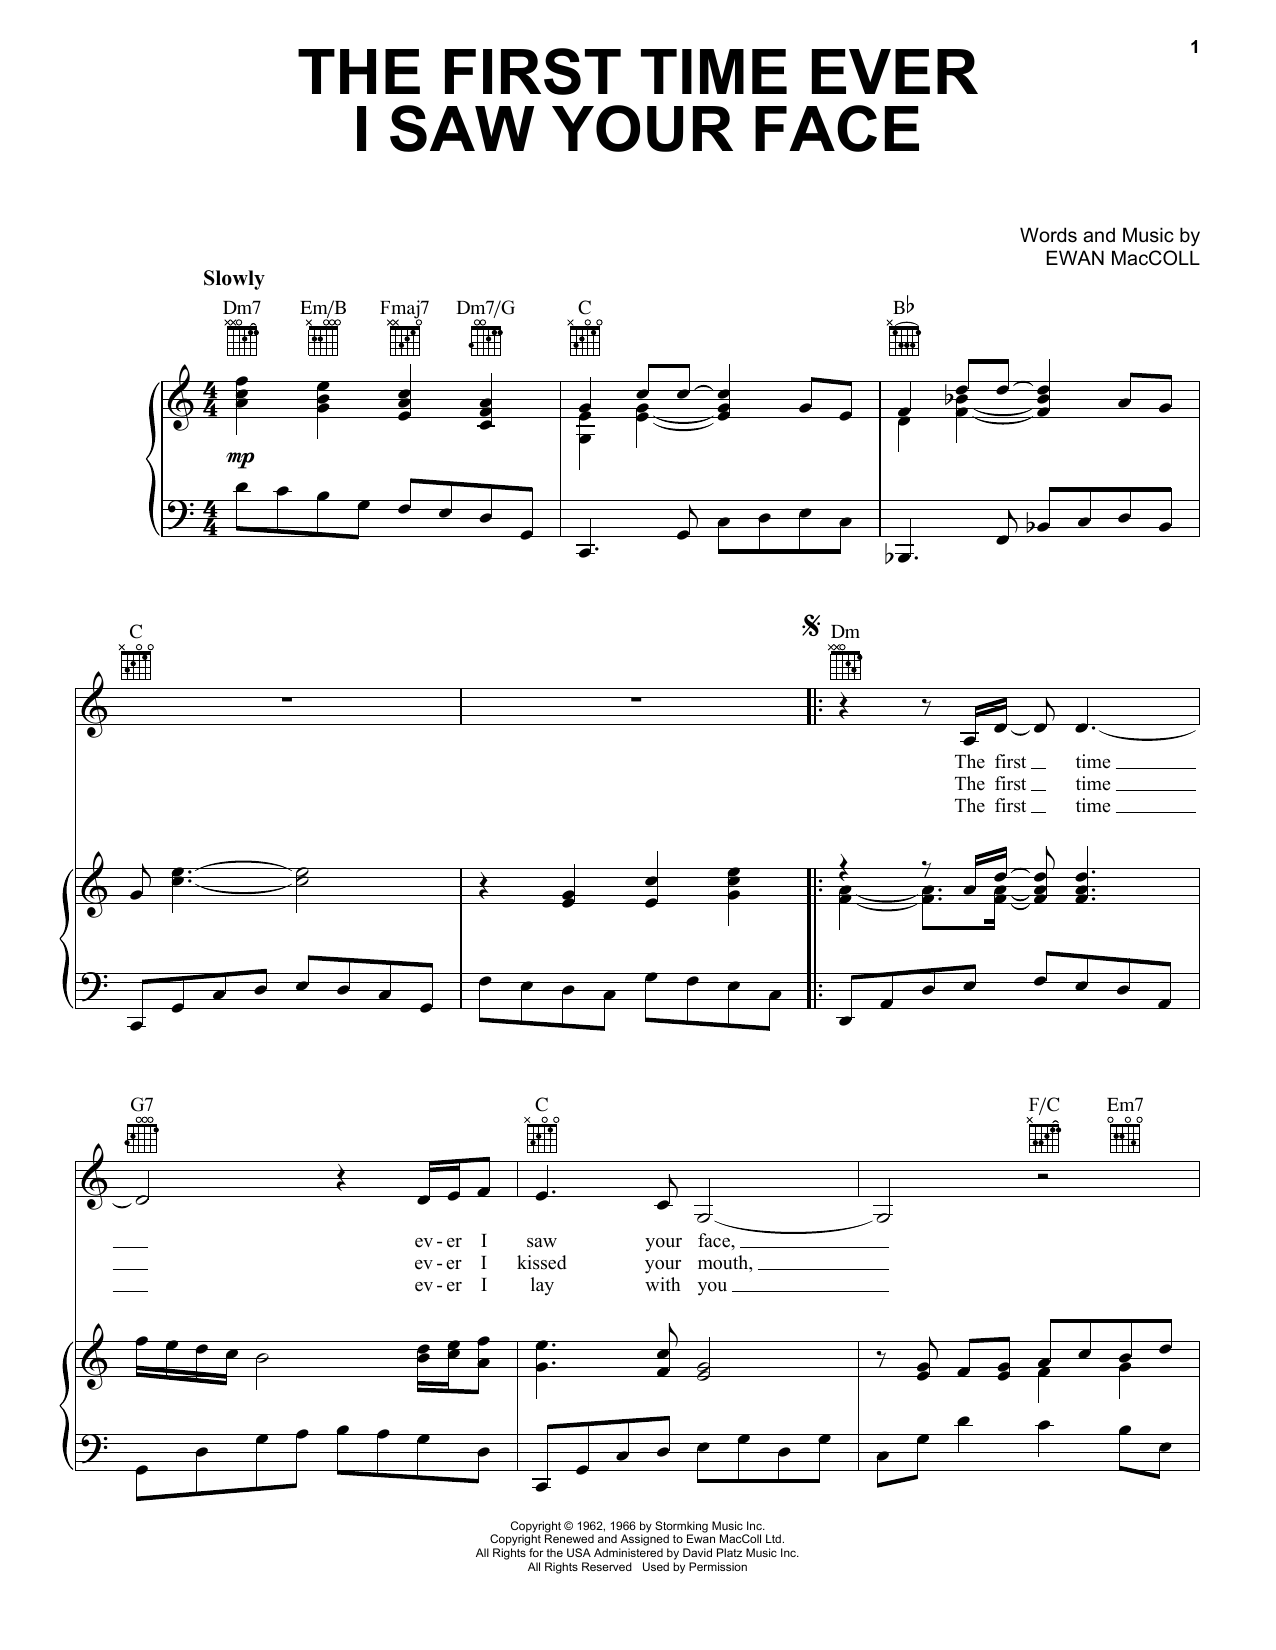 Roberta Flack The First Time Ever I Saw Your Face sheet music notes and chords. Download Printable PDF.